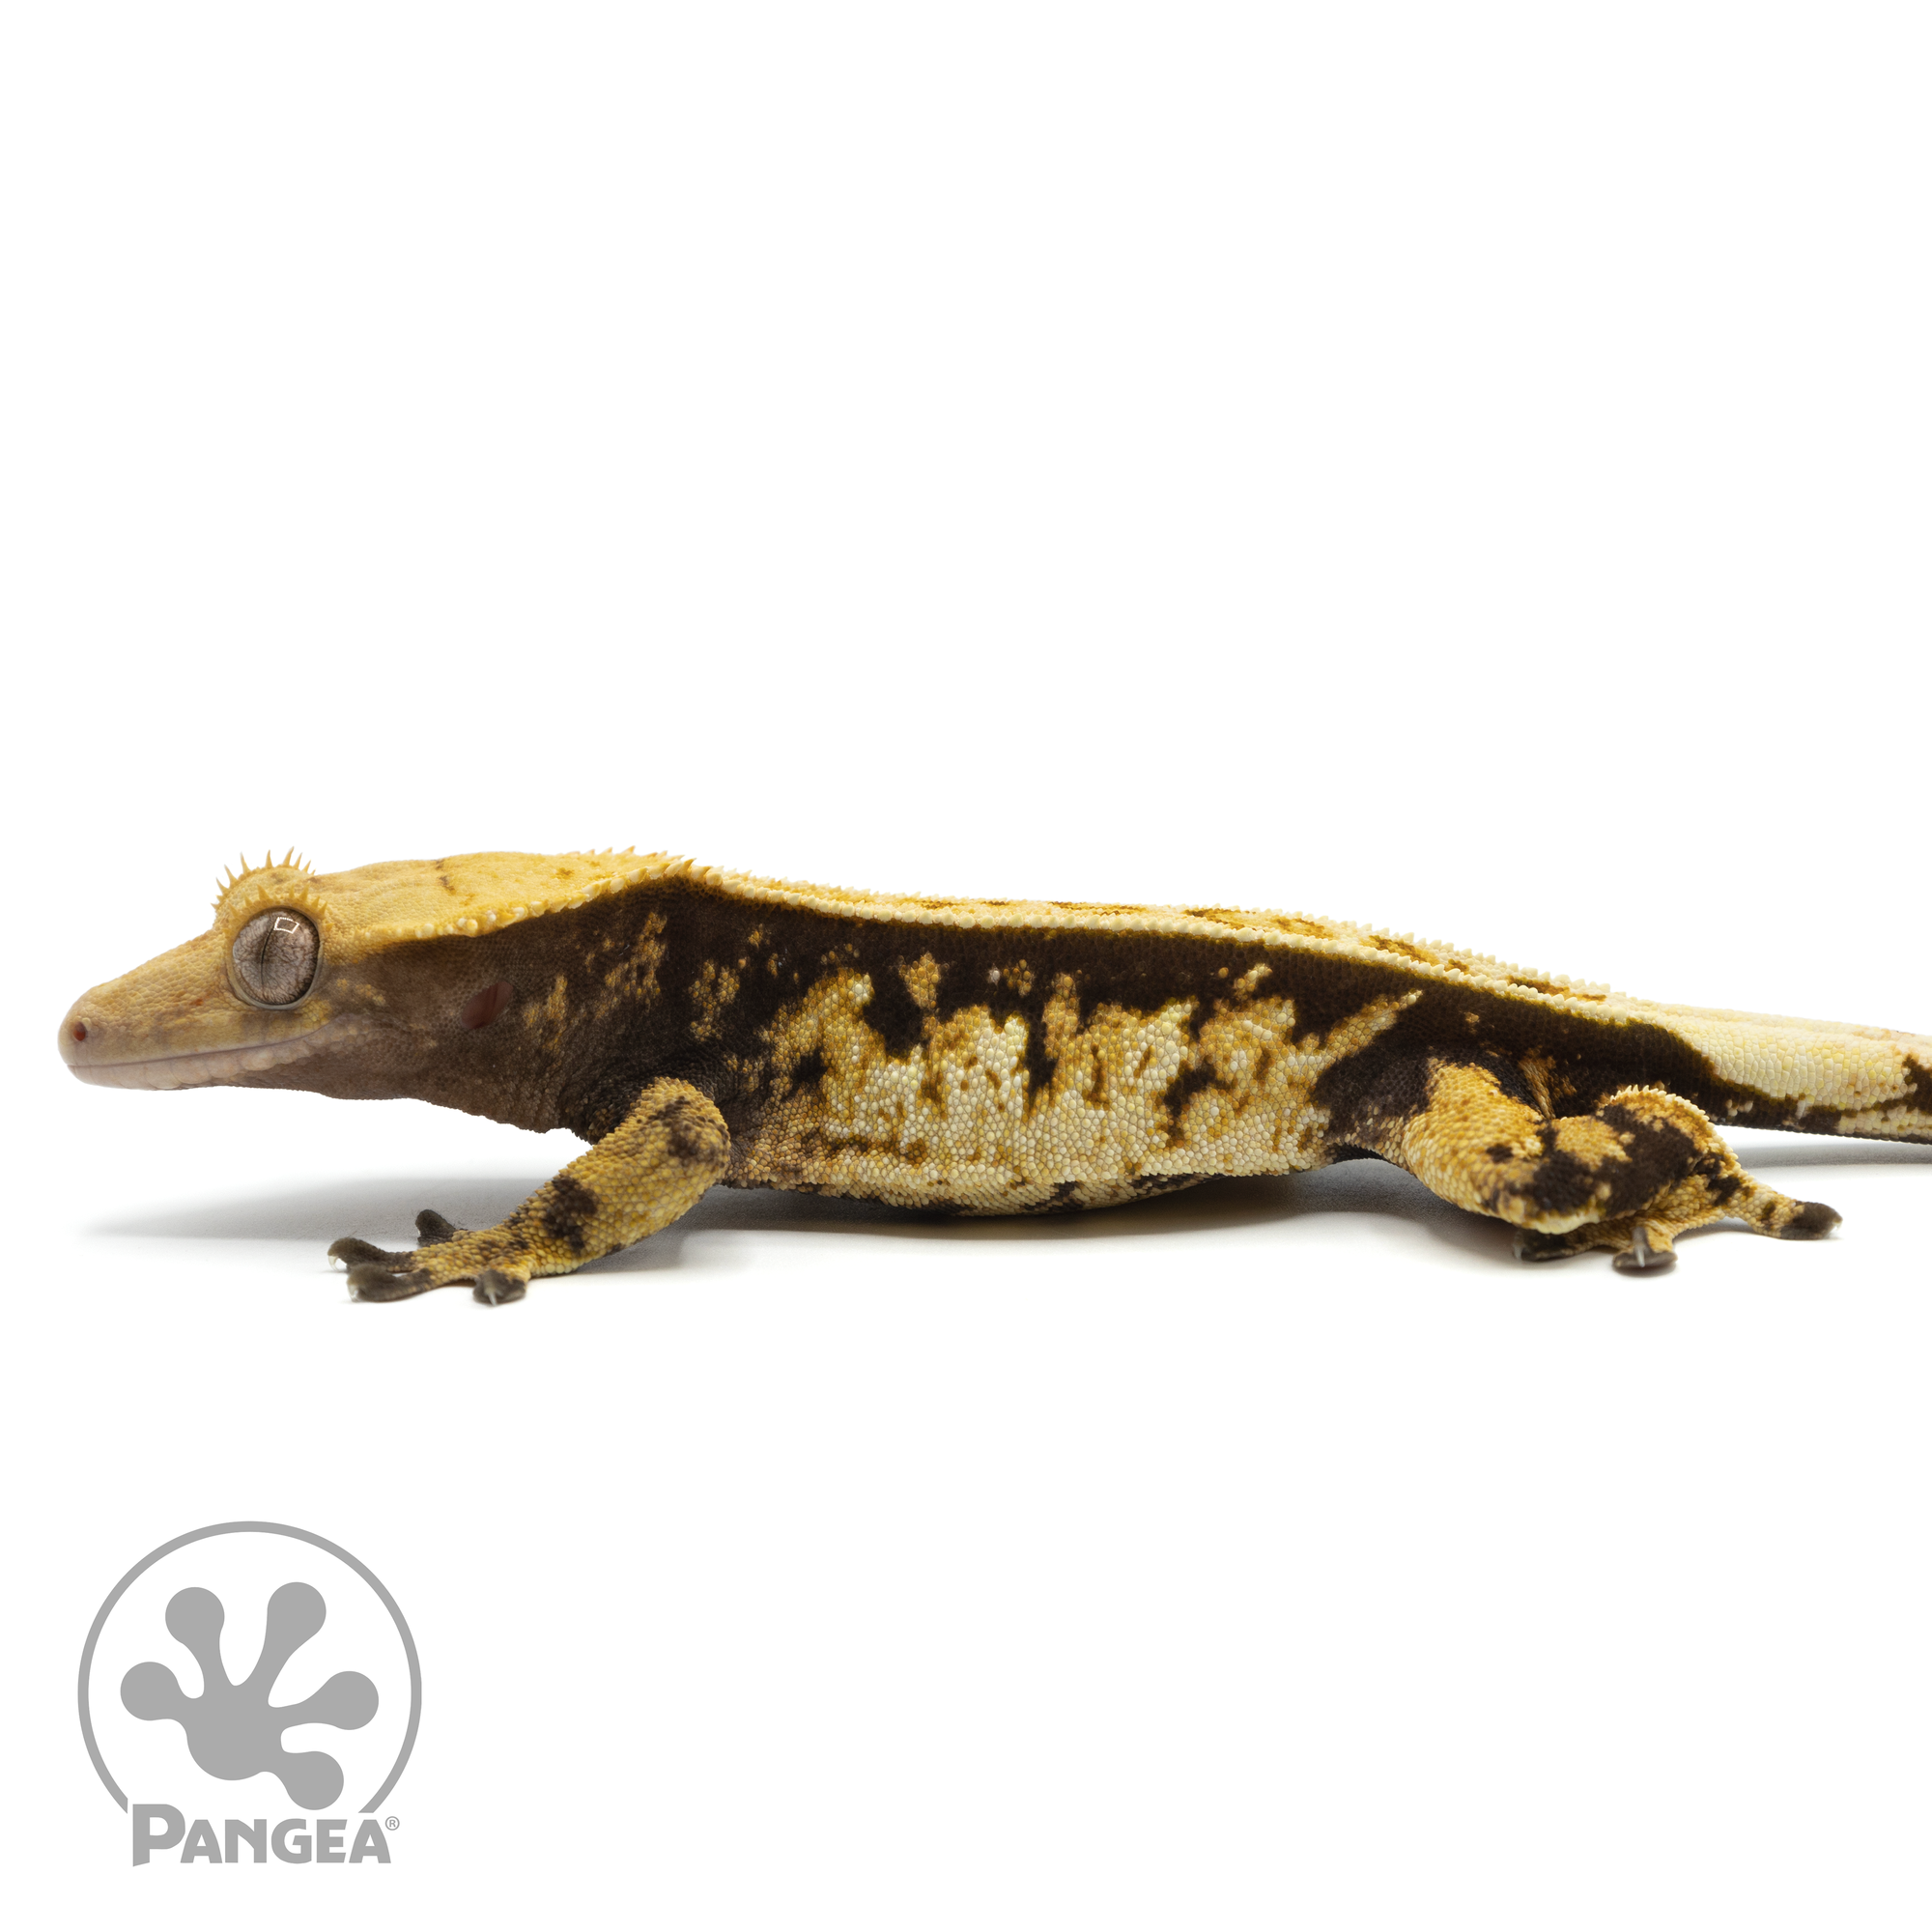 Male Tricolor Pinstripe Crested Gecko Cr-1491 facing left